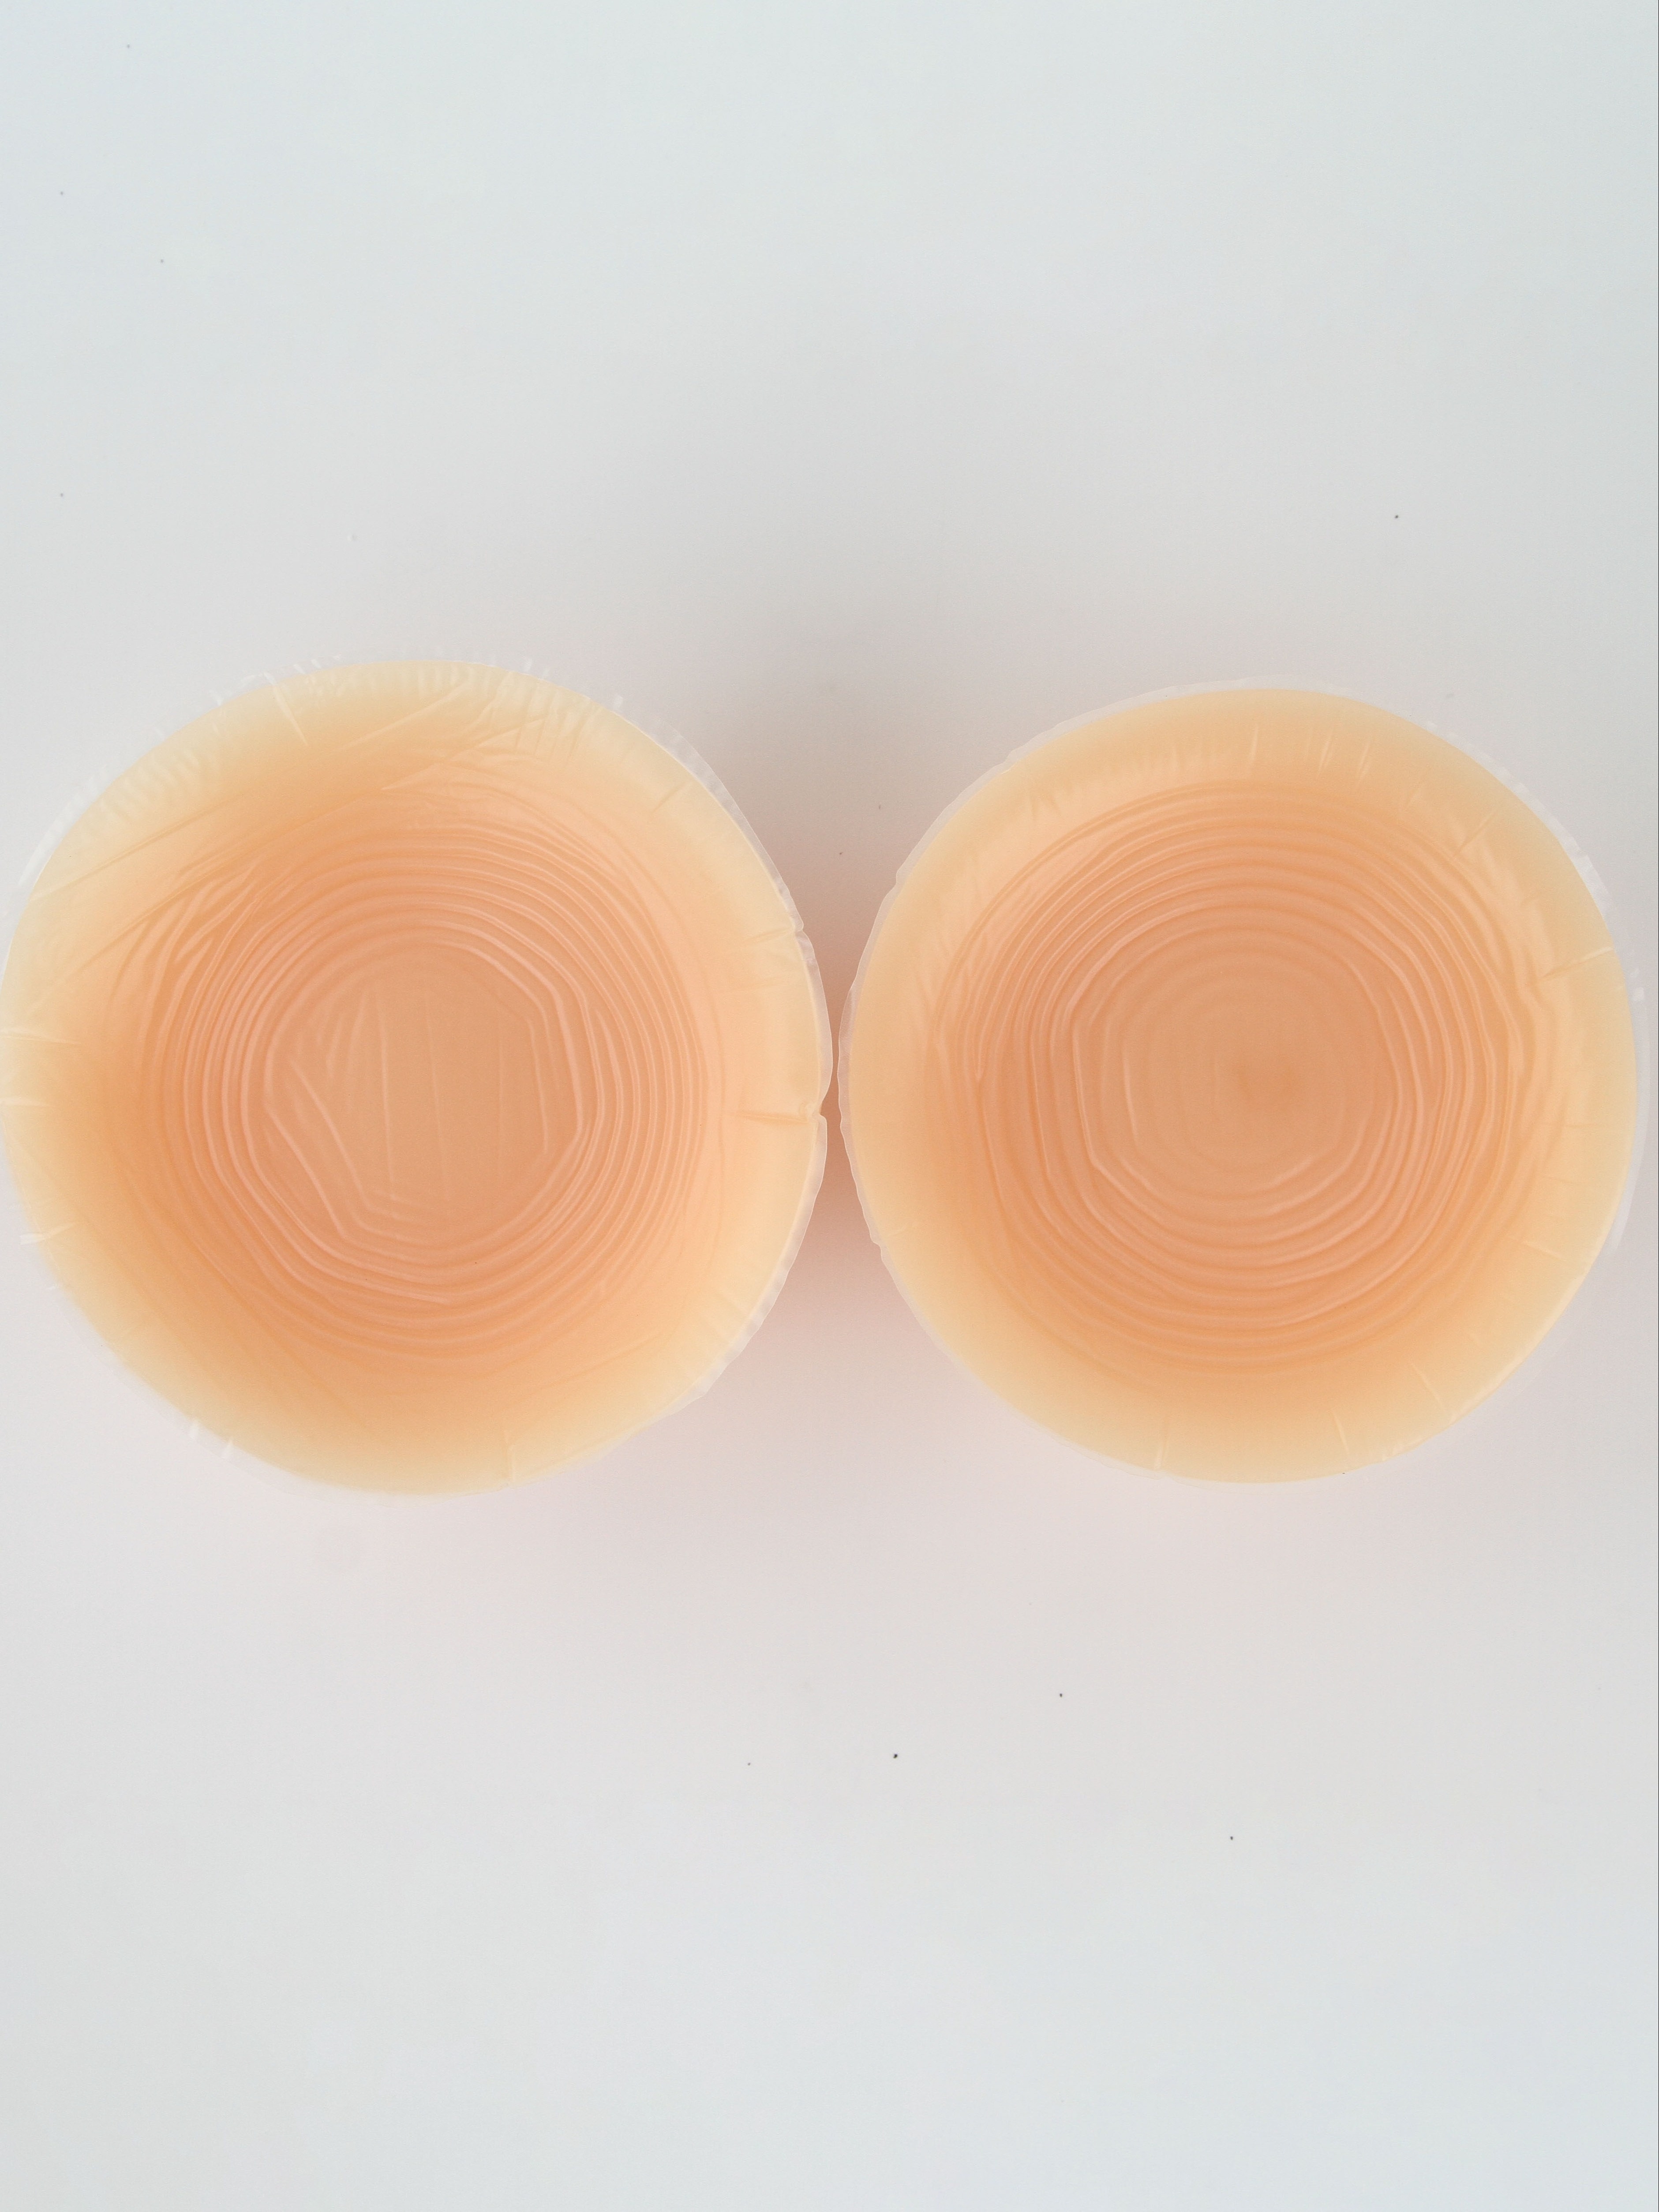  Soft Silicone Breast Forms Self Adhesive False Breast